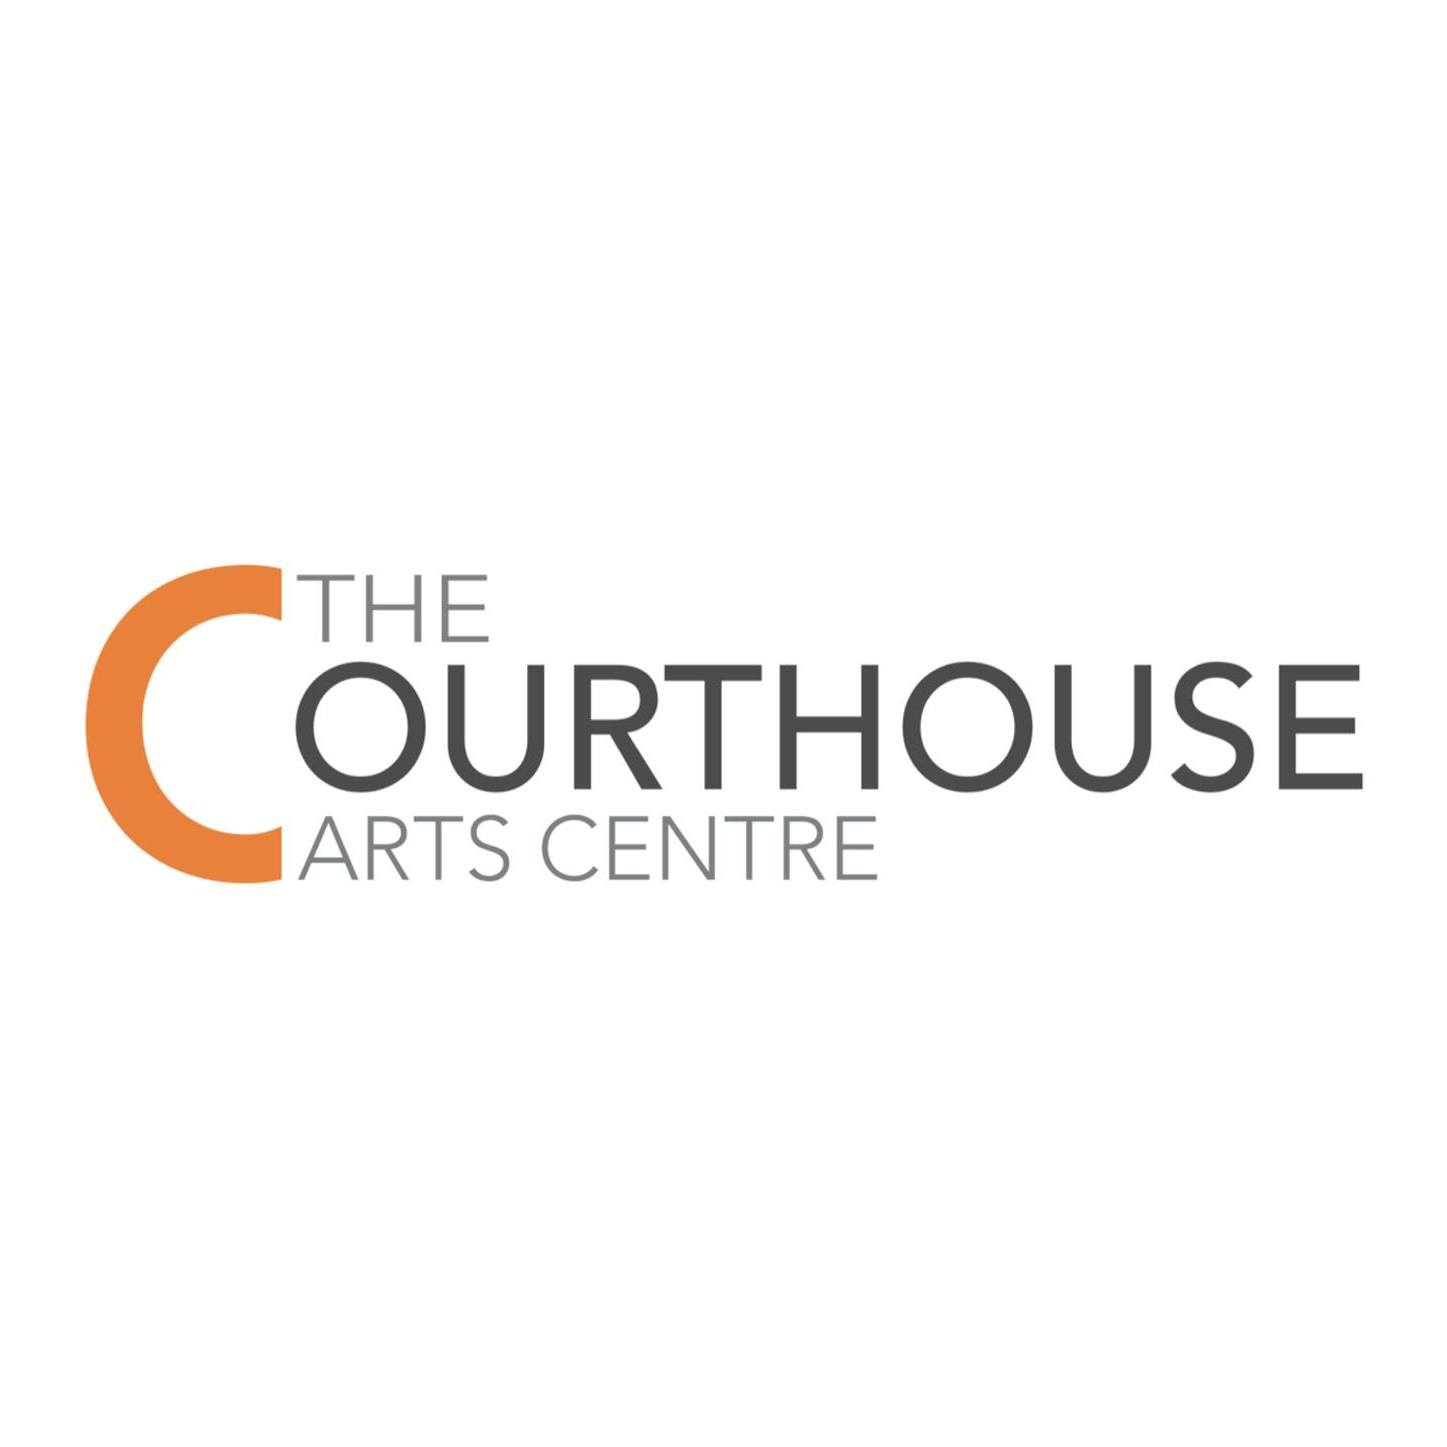 The Courthouse Arts Centre